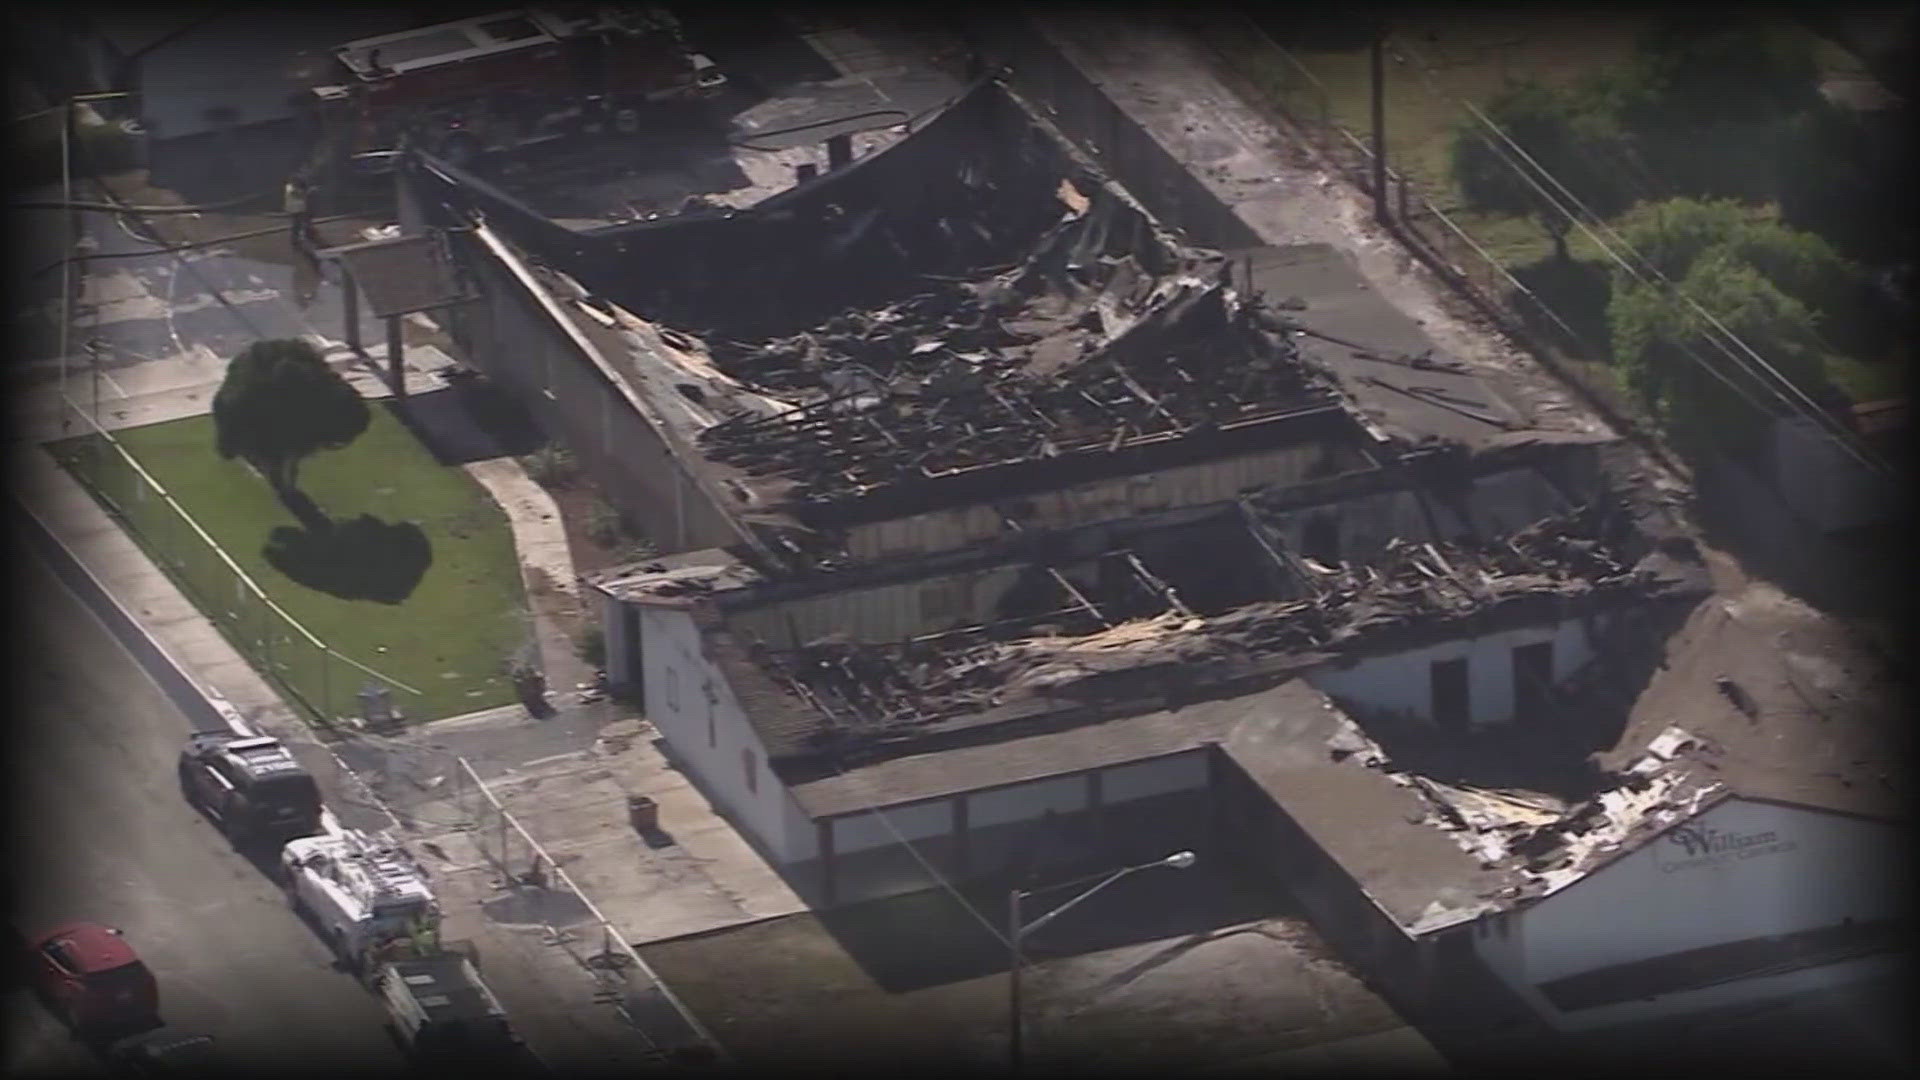 Community shows outpouring of support for Catholic church destroyed by fire last week.